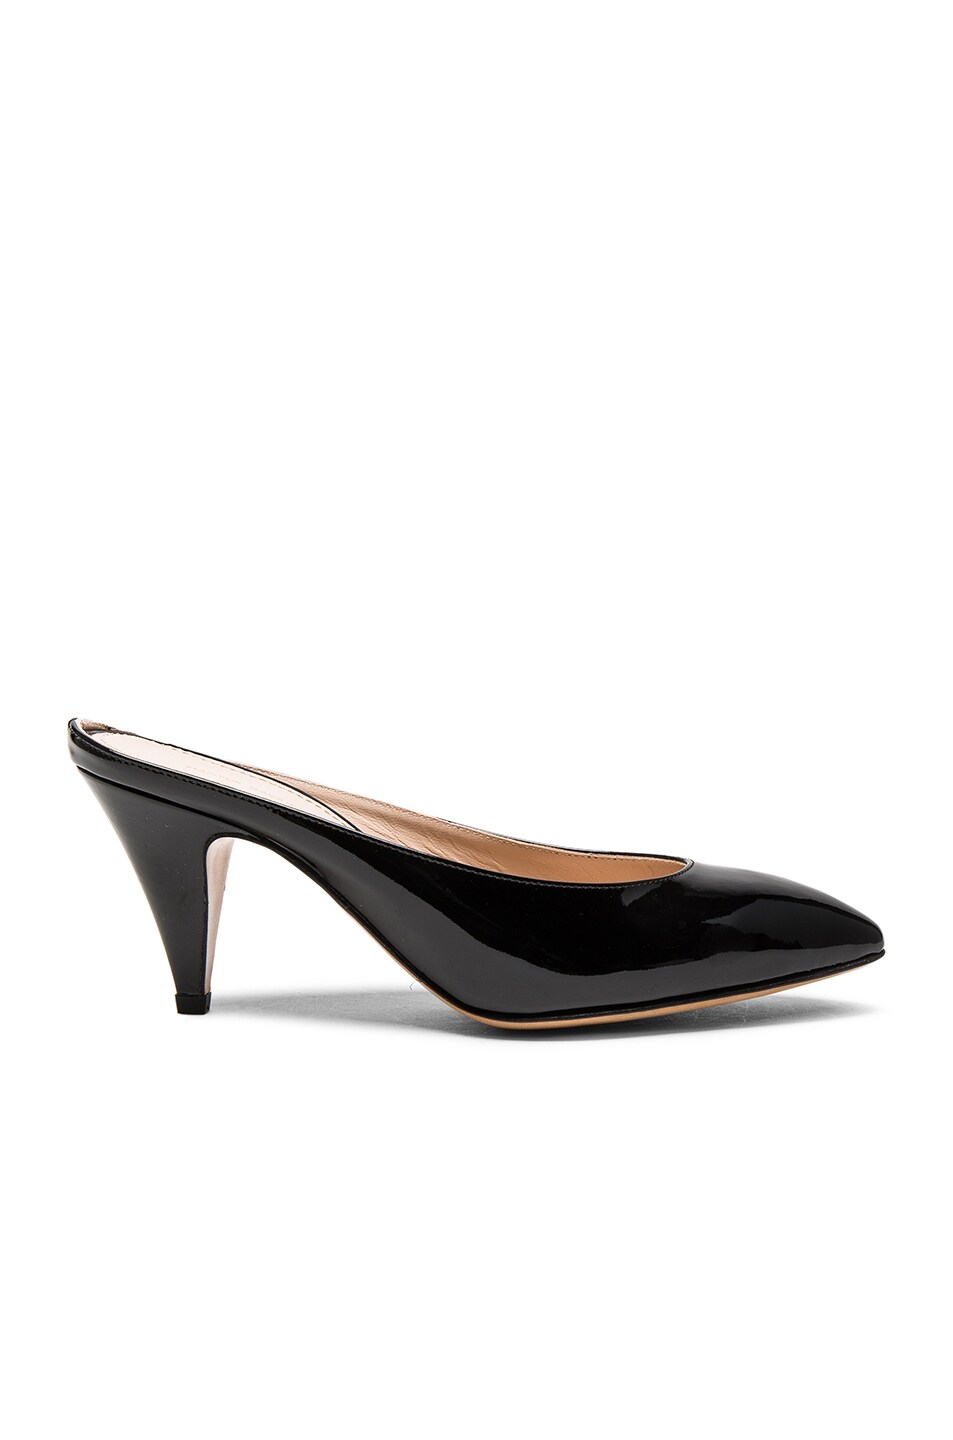 Image 1 of Mansur Gavriel Patent Leather Heel Slippers in Black Patent